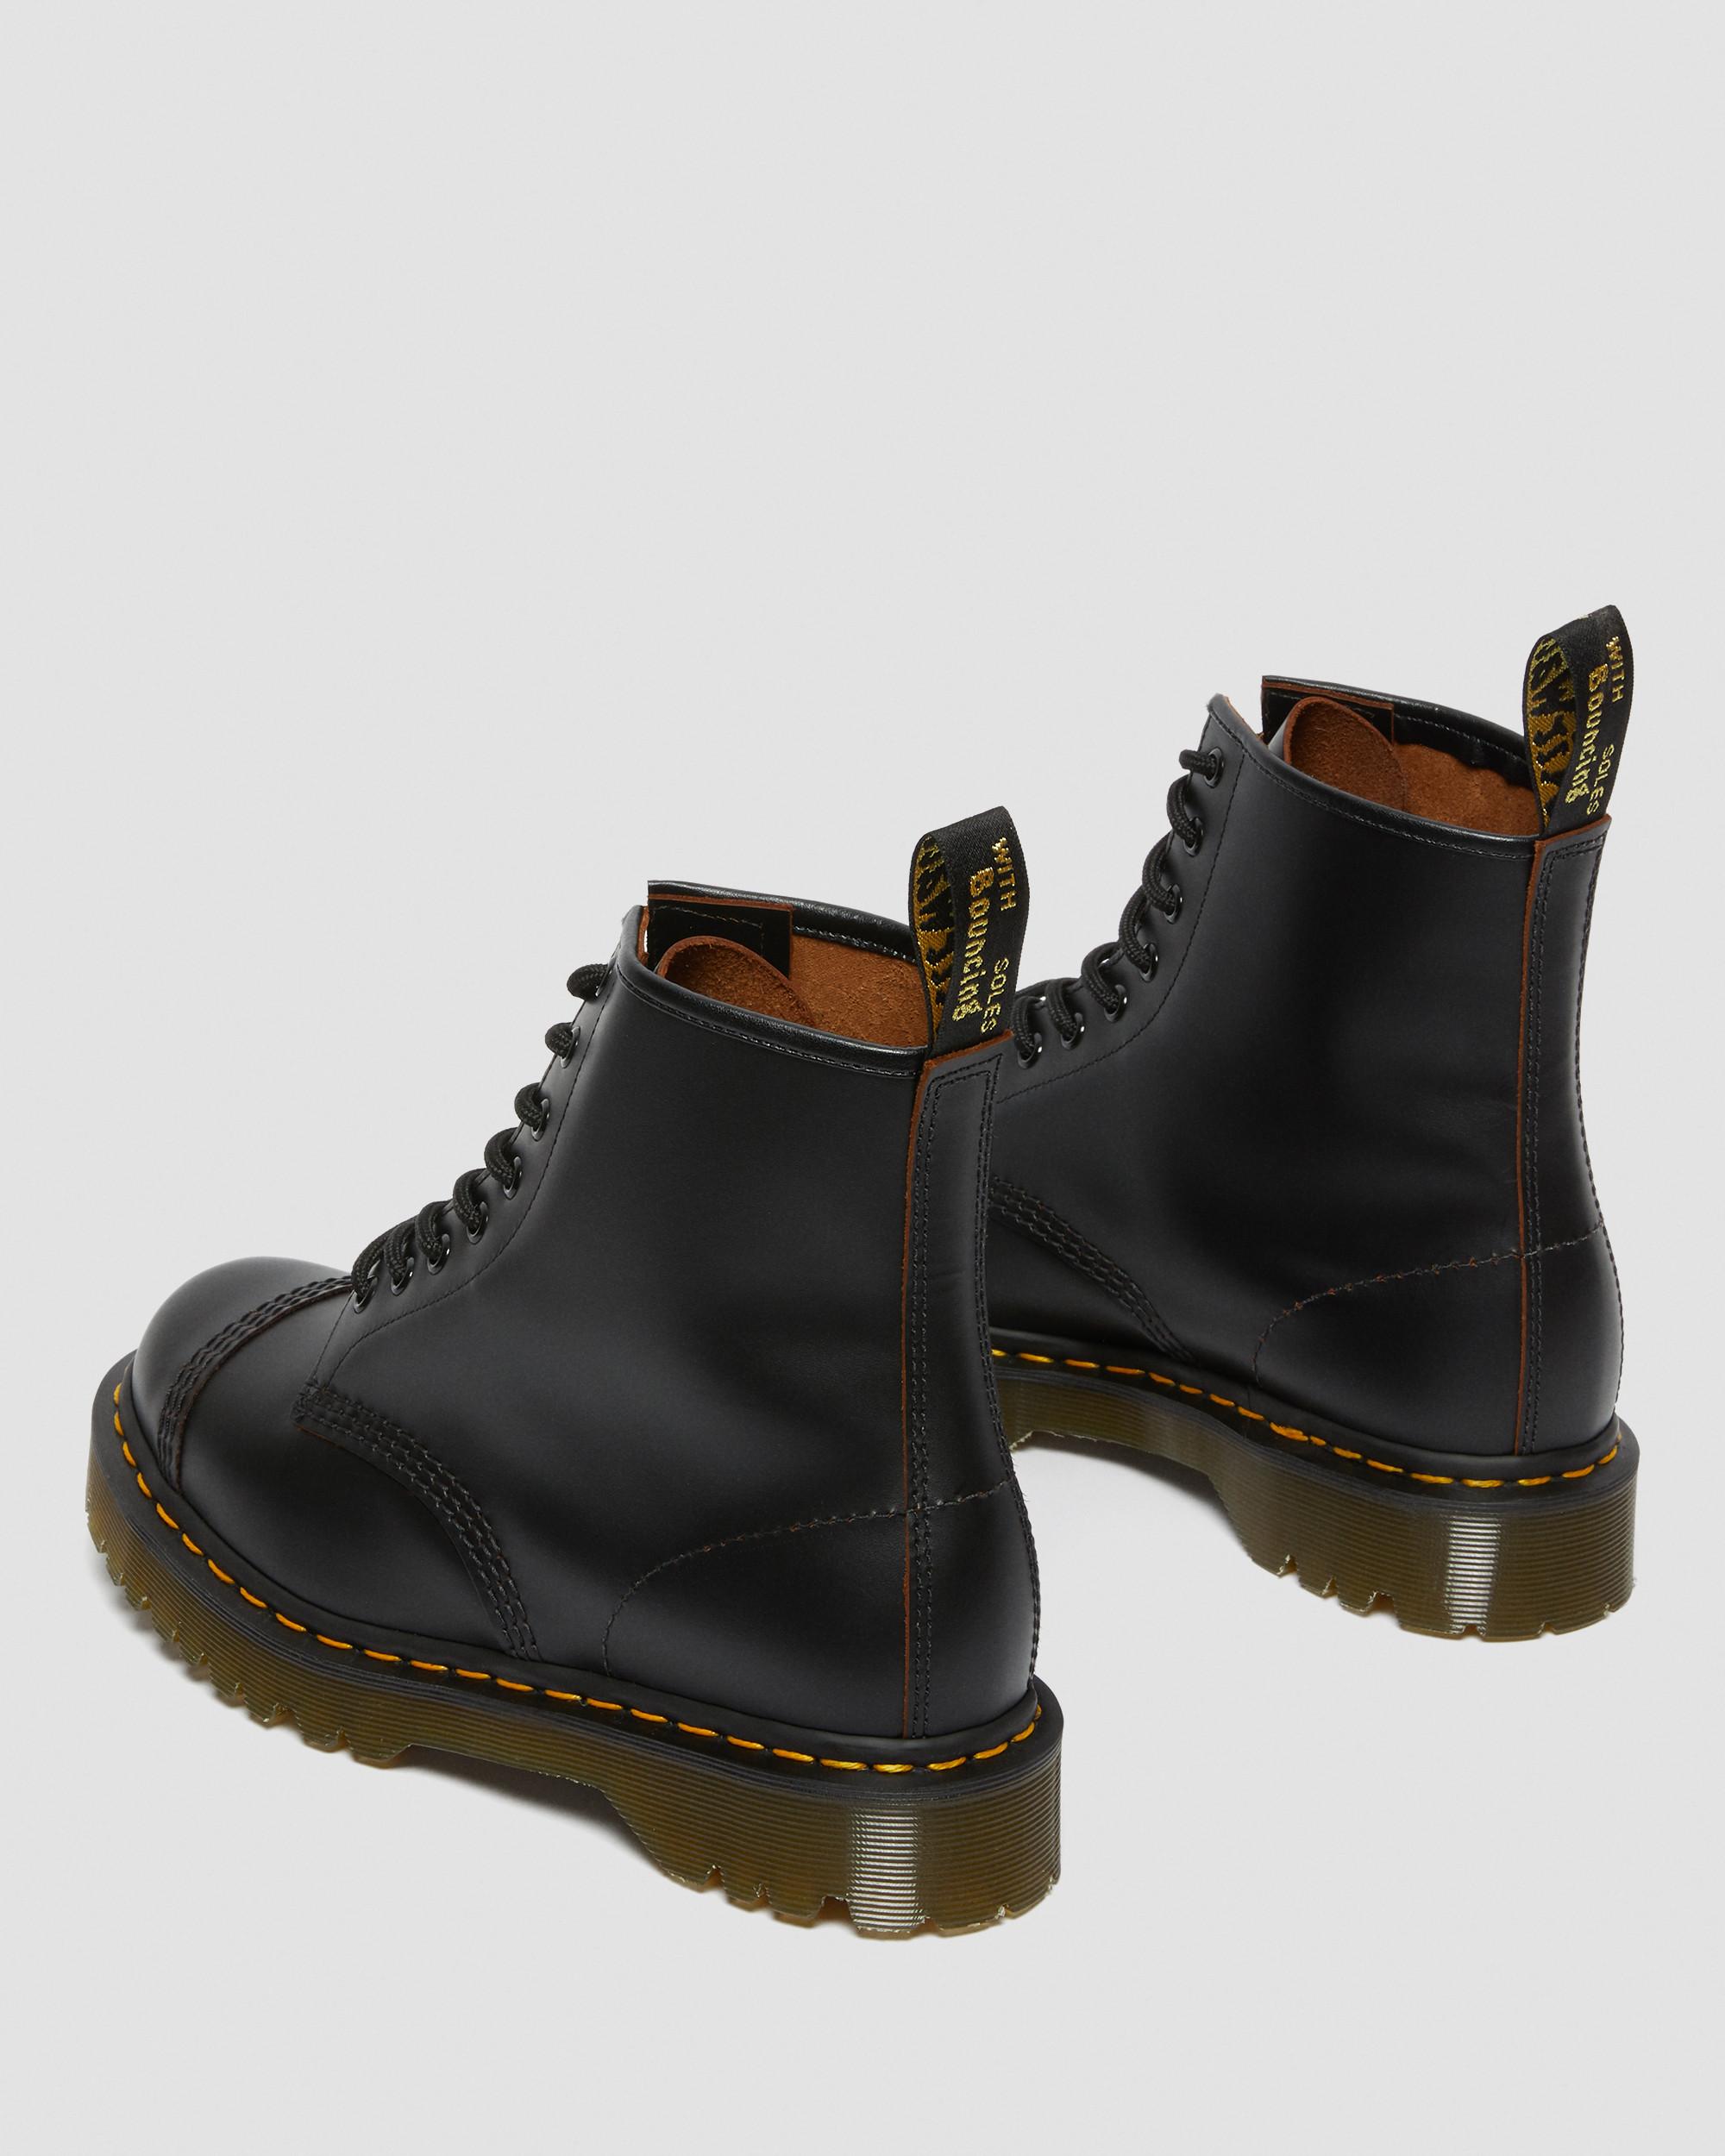 DR MARTENS 1460 Bex Made in England Toe Cap Lace Up Boots